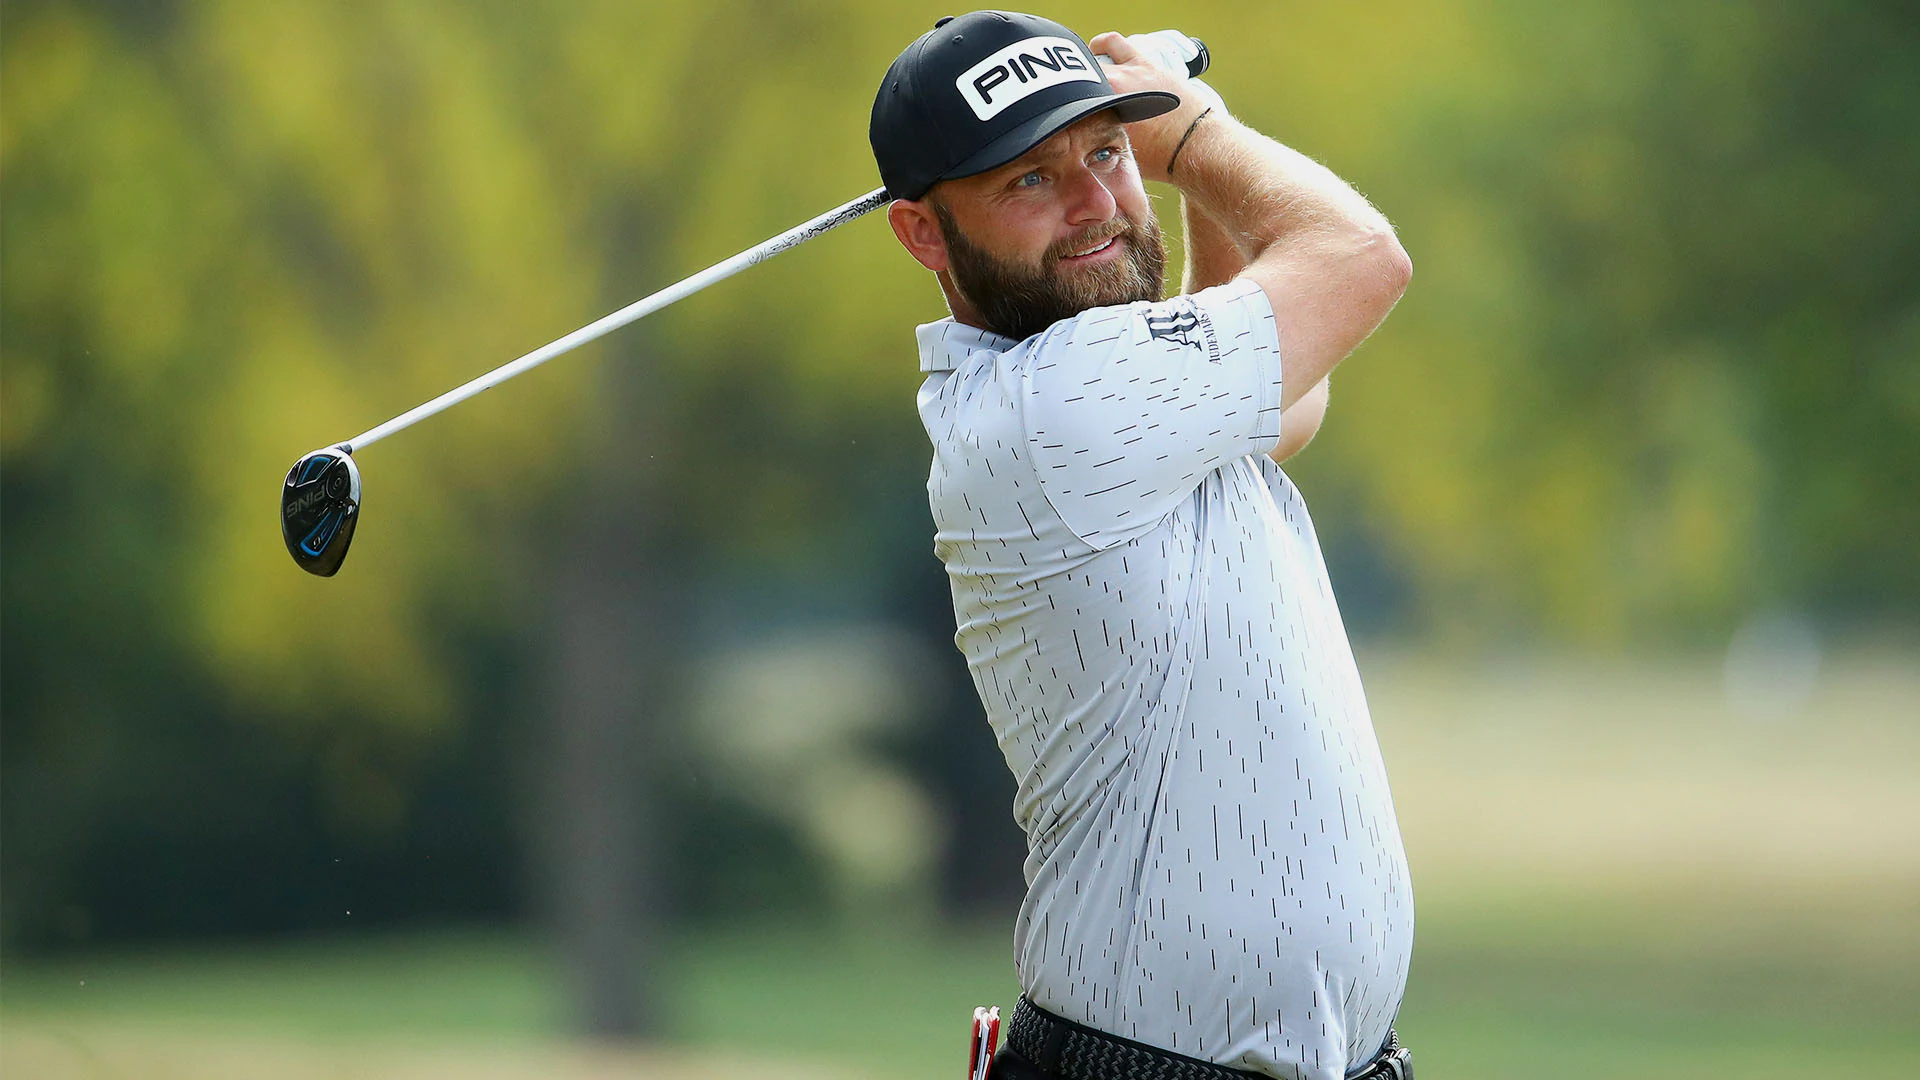 Andy Sullivan cards 64 to extend English Championship lead to 5